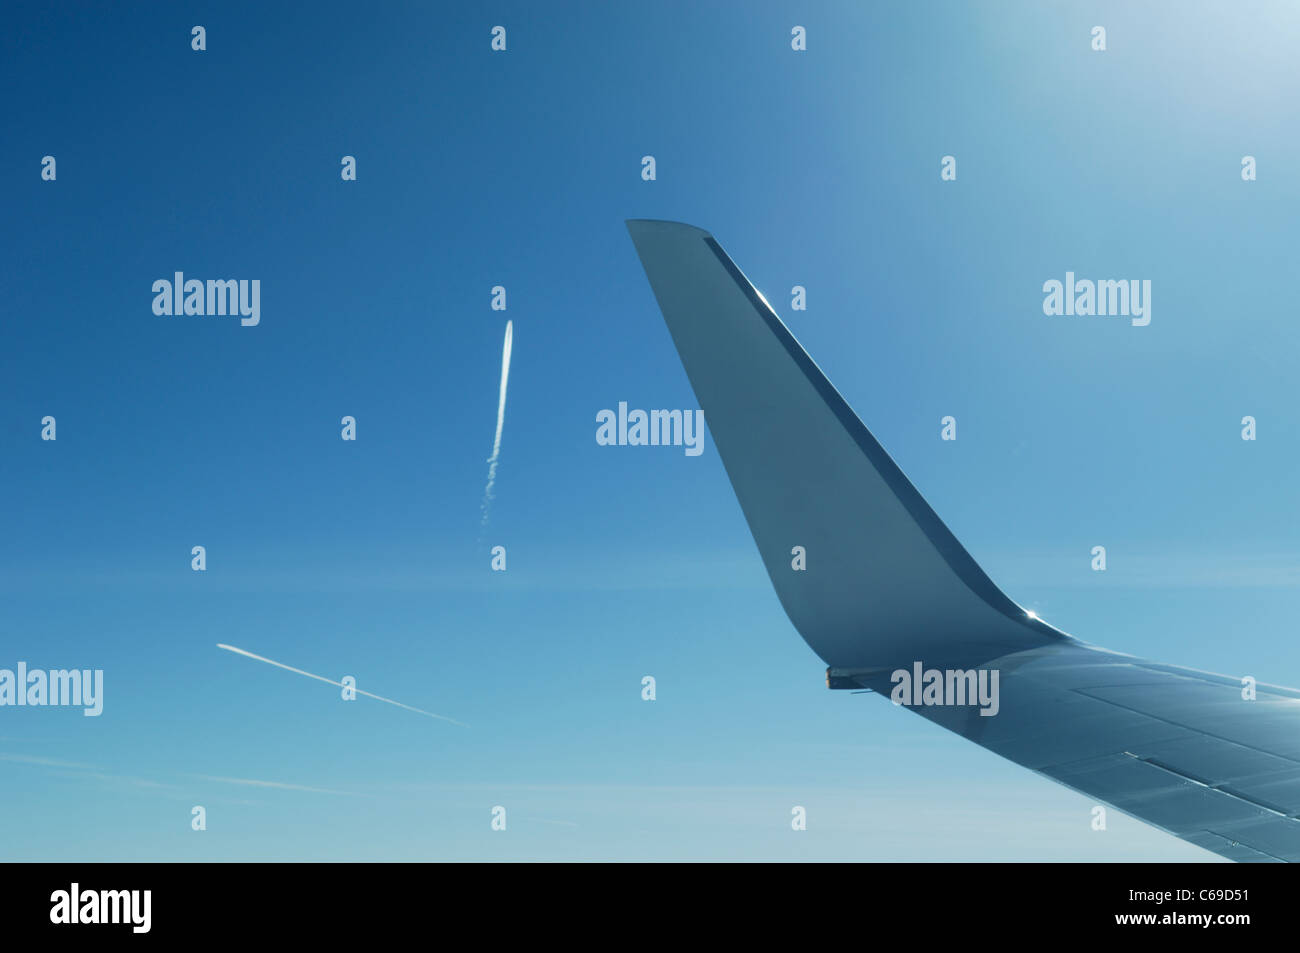 Plane wing with airliners fumes traces in blue sky, France Stock Photo